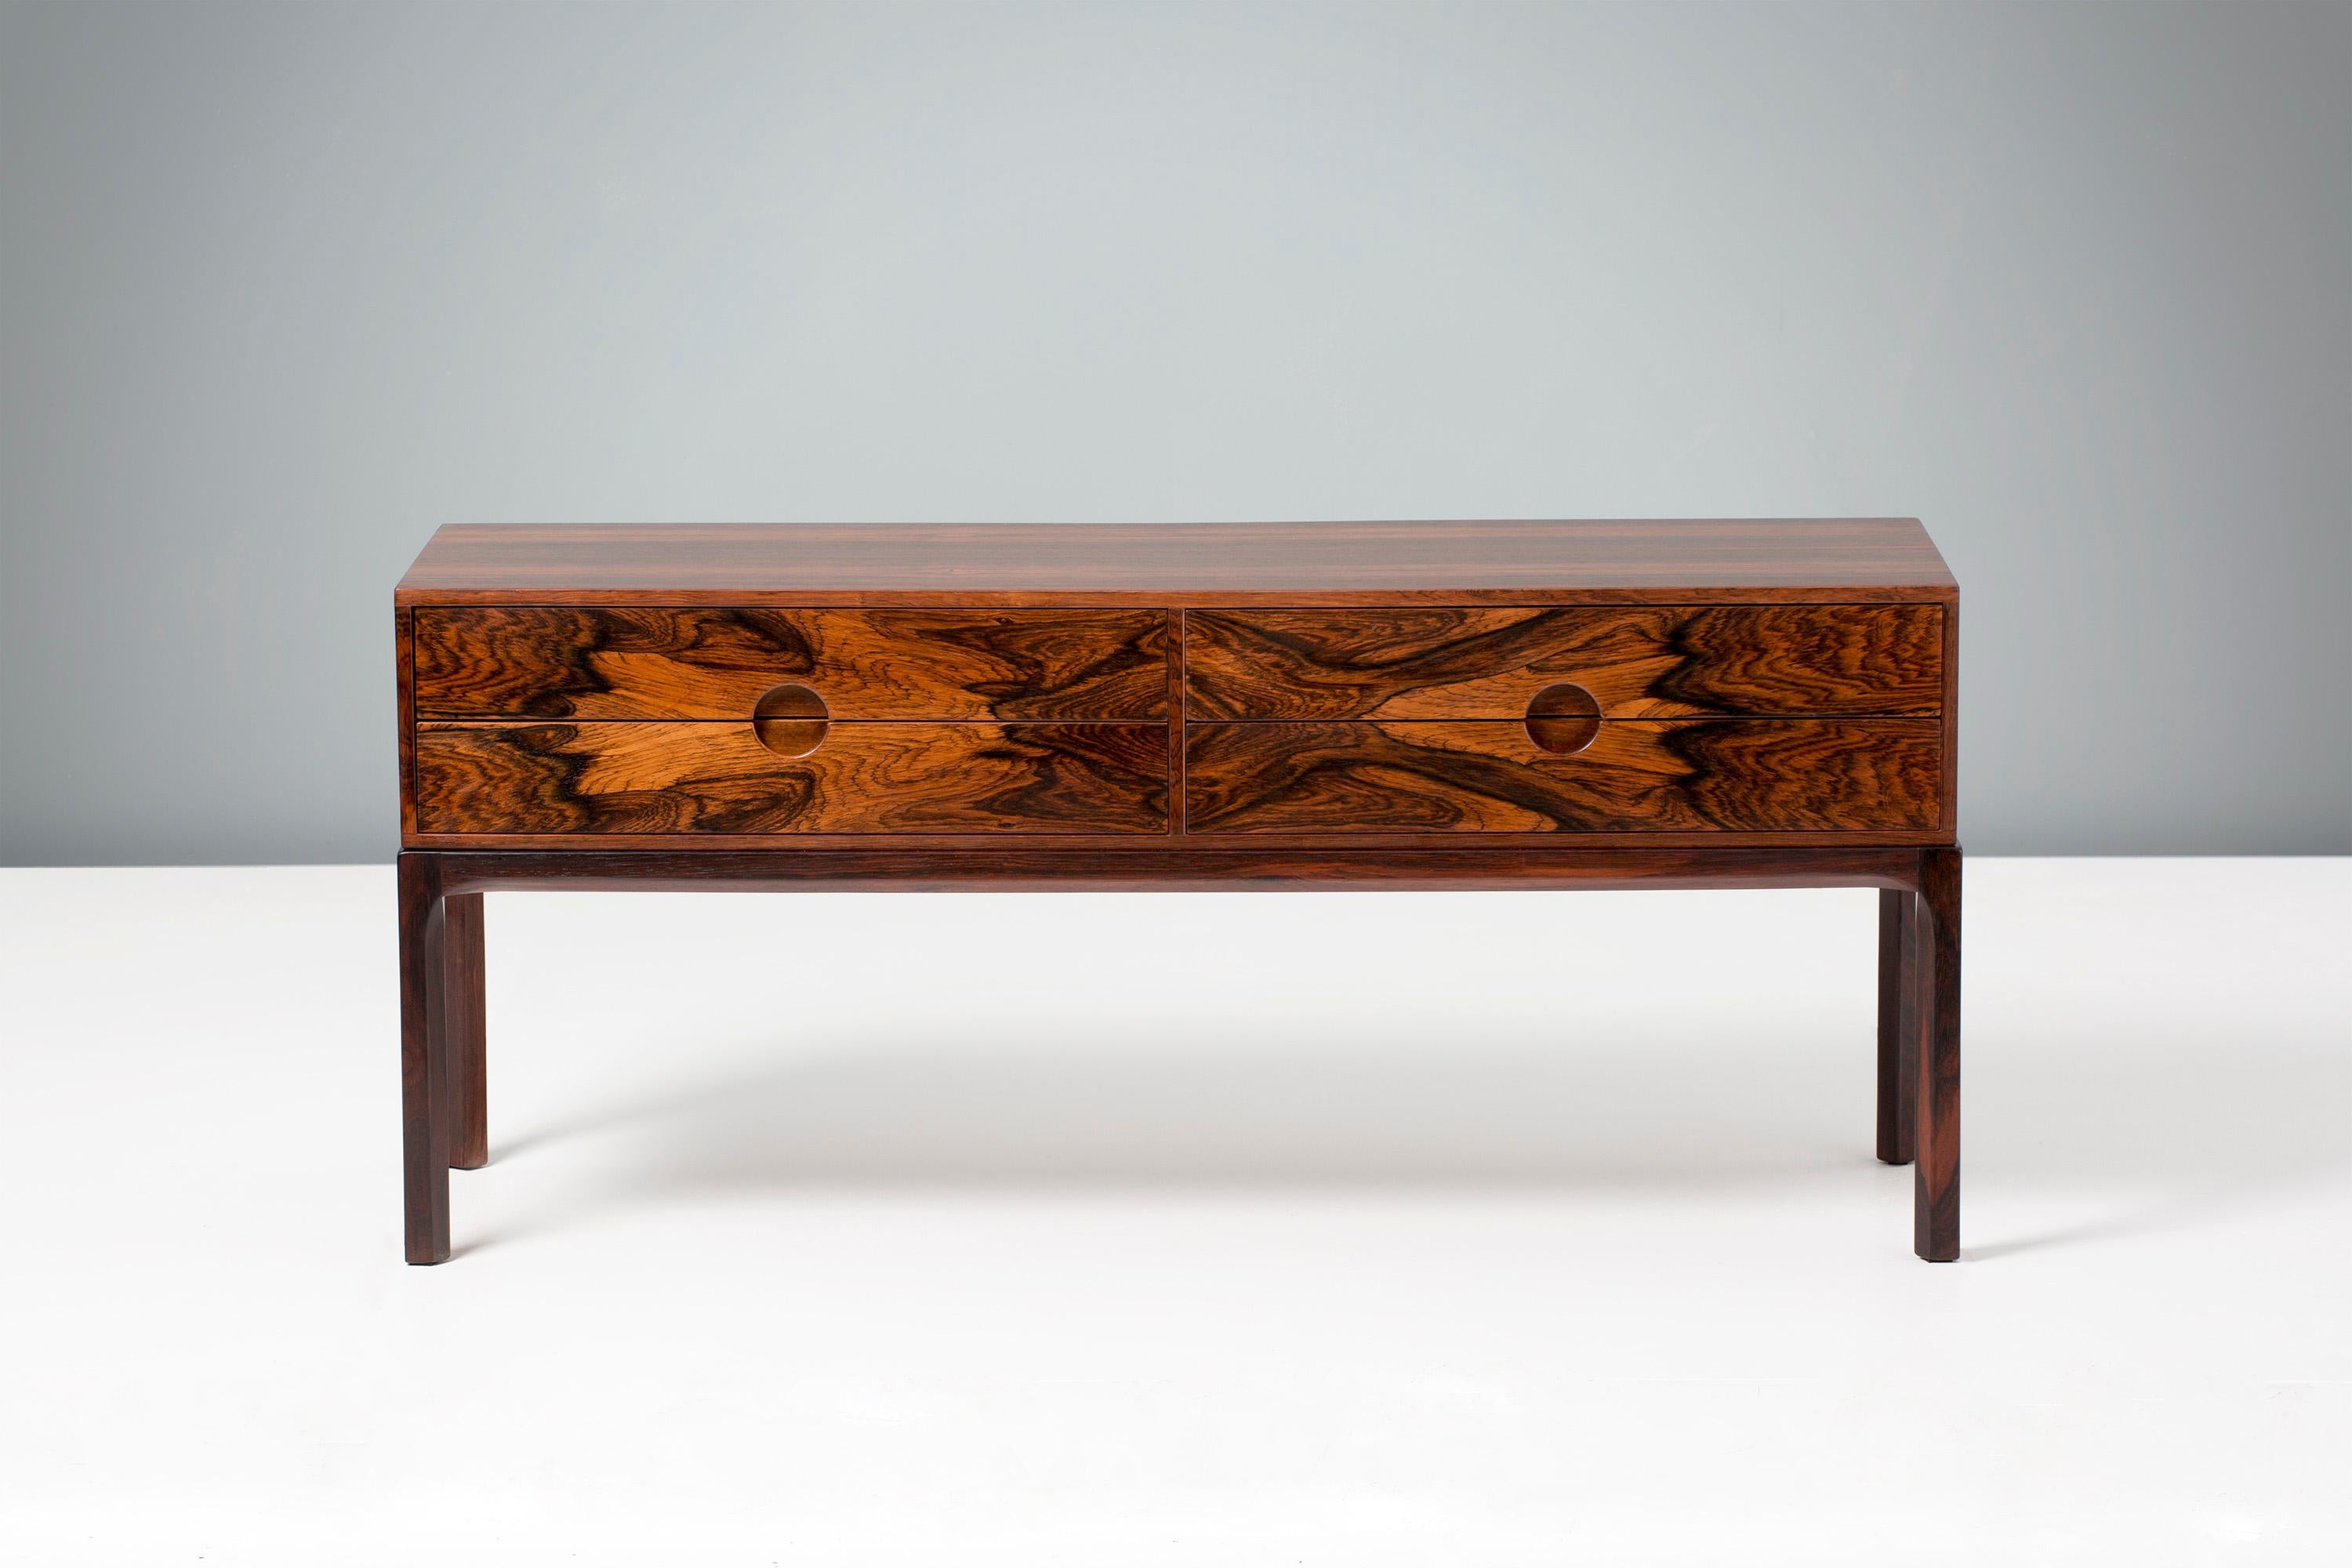 Kai Kristiansen
Low chest, circa 1960.

Low, 4-drawer chest made from solid and veneered Brazilian rosewood, produced by cabinetmaker Aksel Kjaersgaard in Odder, Denmark, circa 1960.

The chest has 2 sets of drawers with Kristiansen's trademark